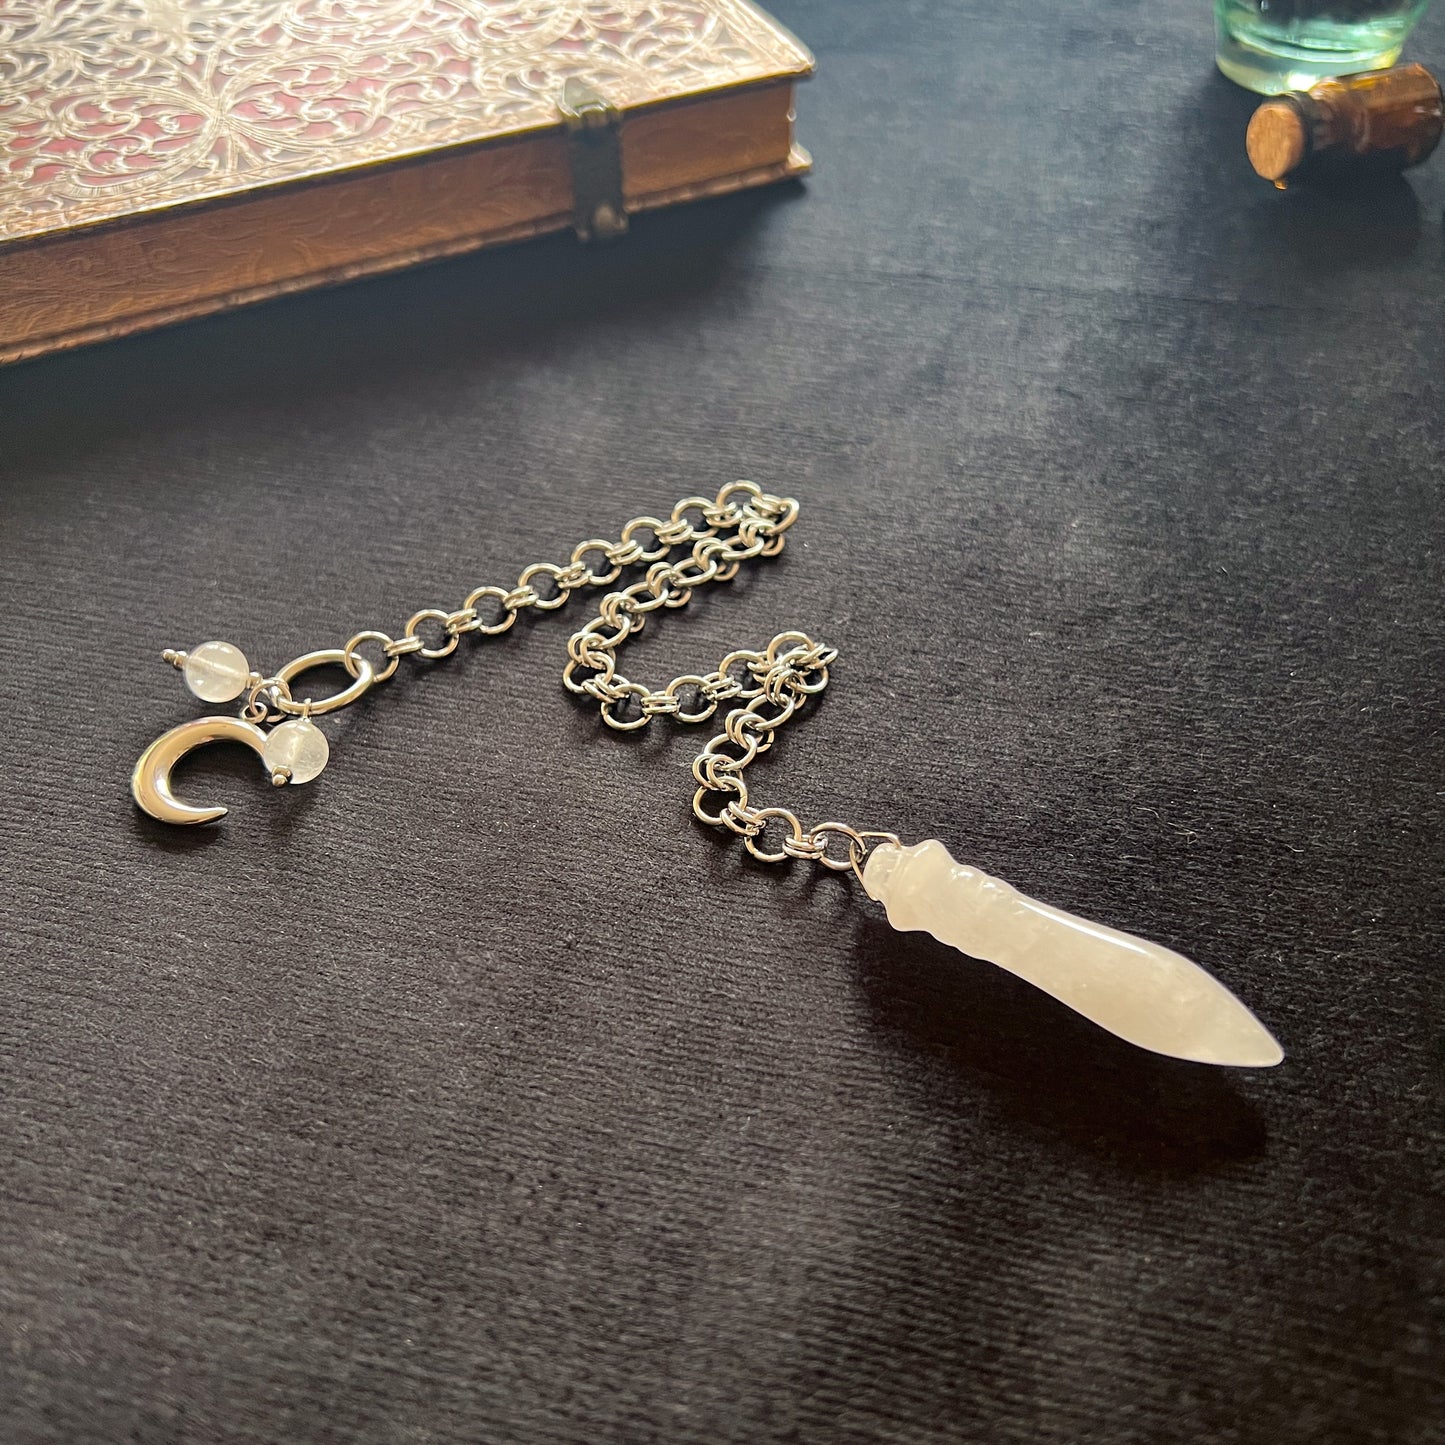 Egyptian Thot pendulum quartz chainmail, crescent moon and stainless steel Baguette Magick